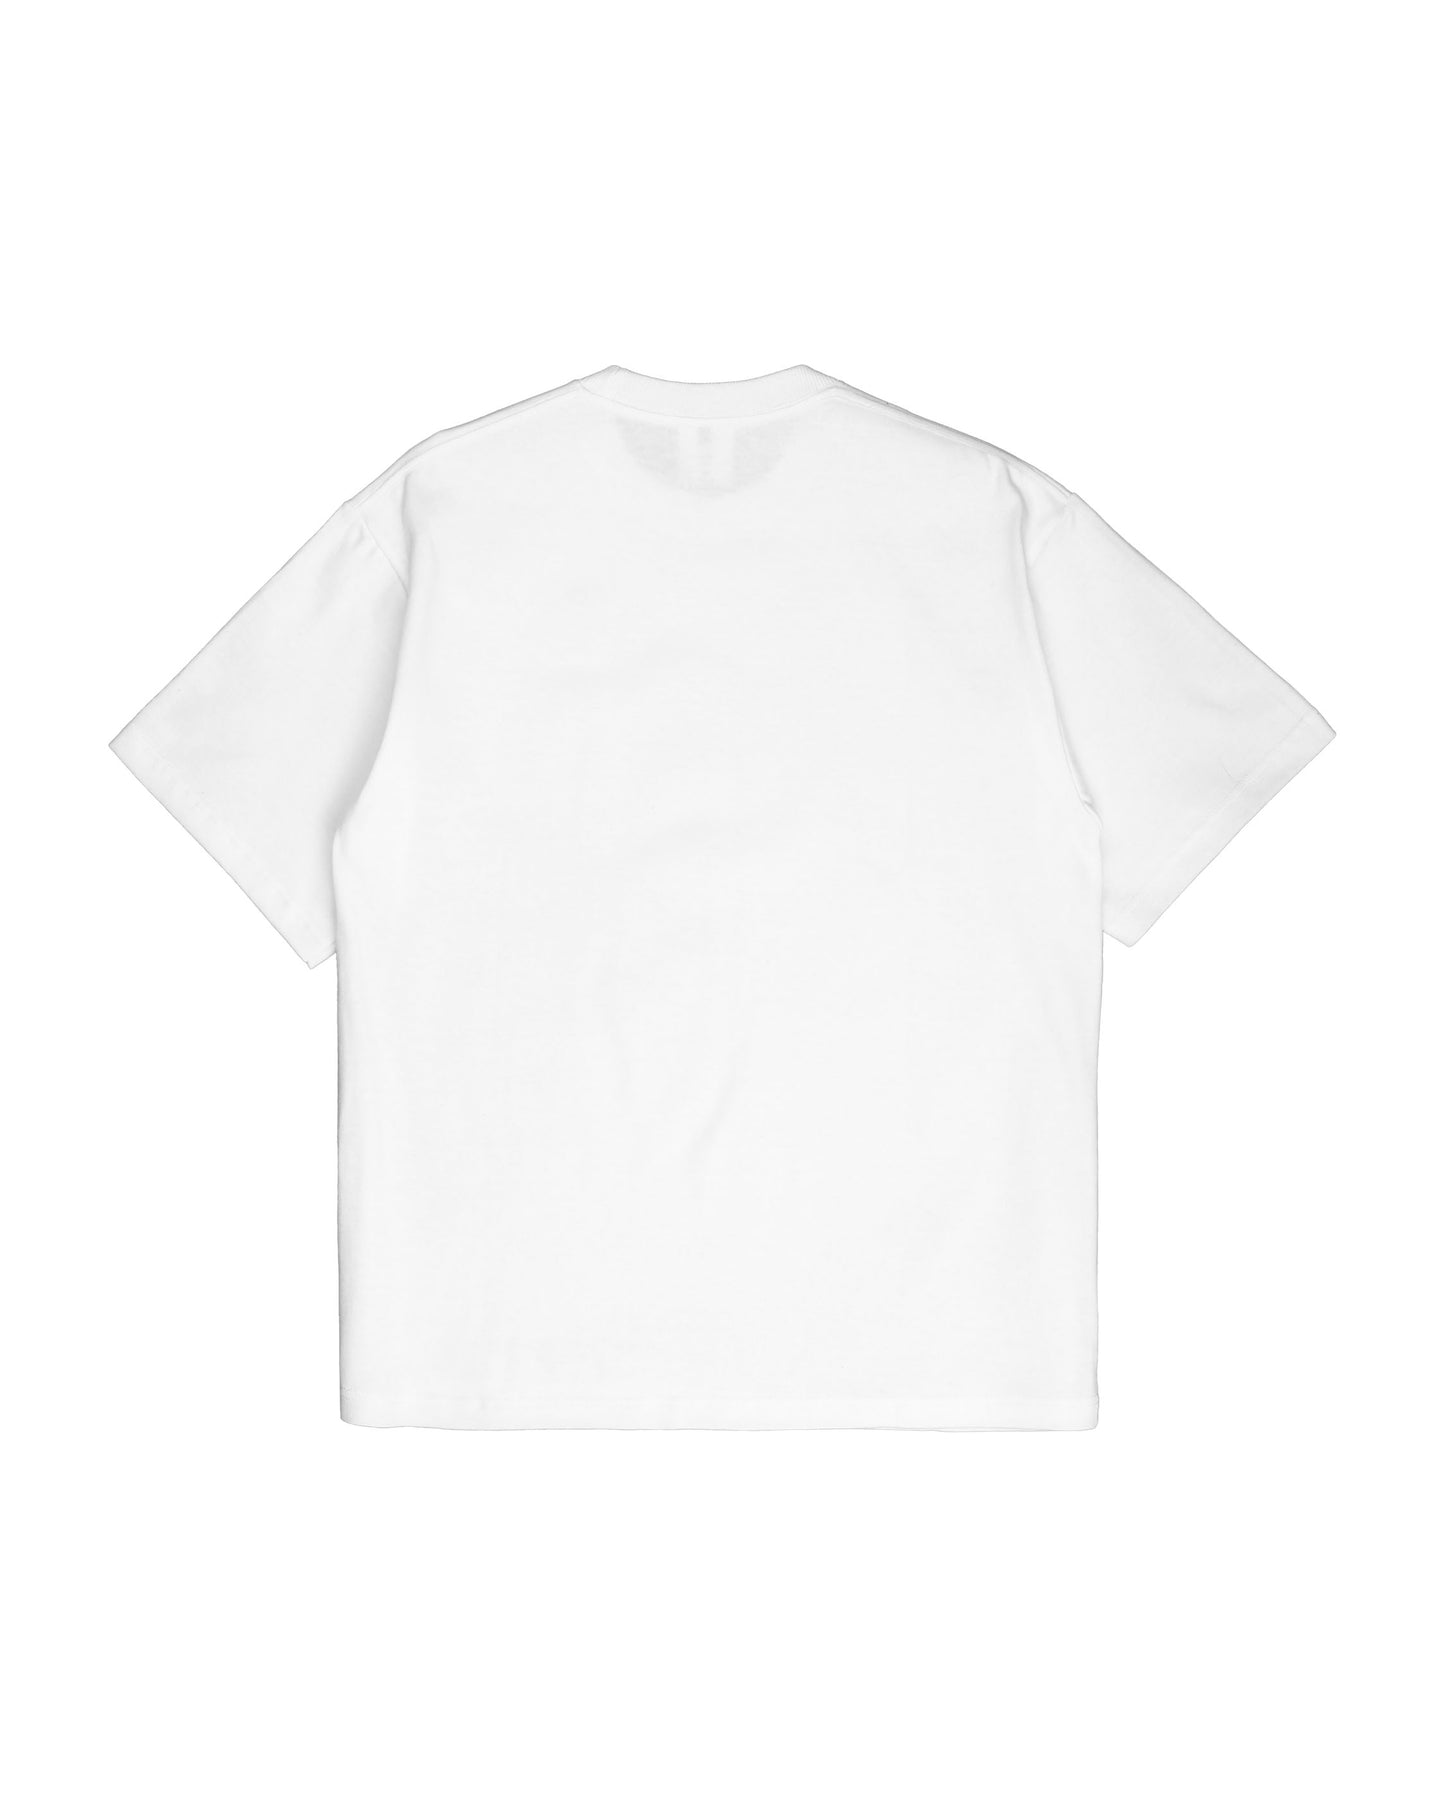 Lustro White Relaxed Fit Pocket Tees